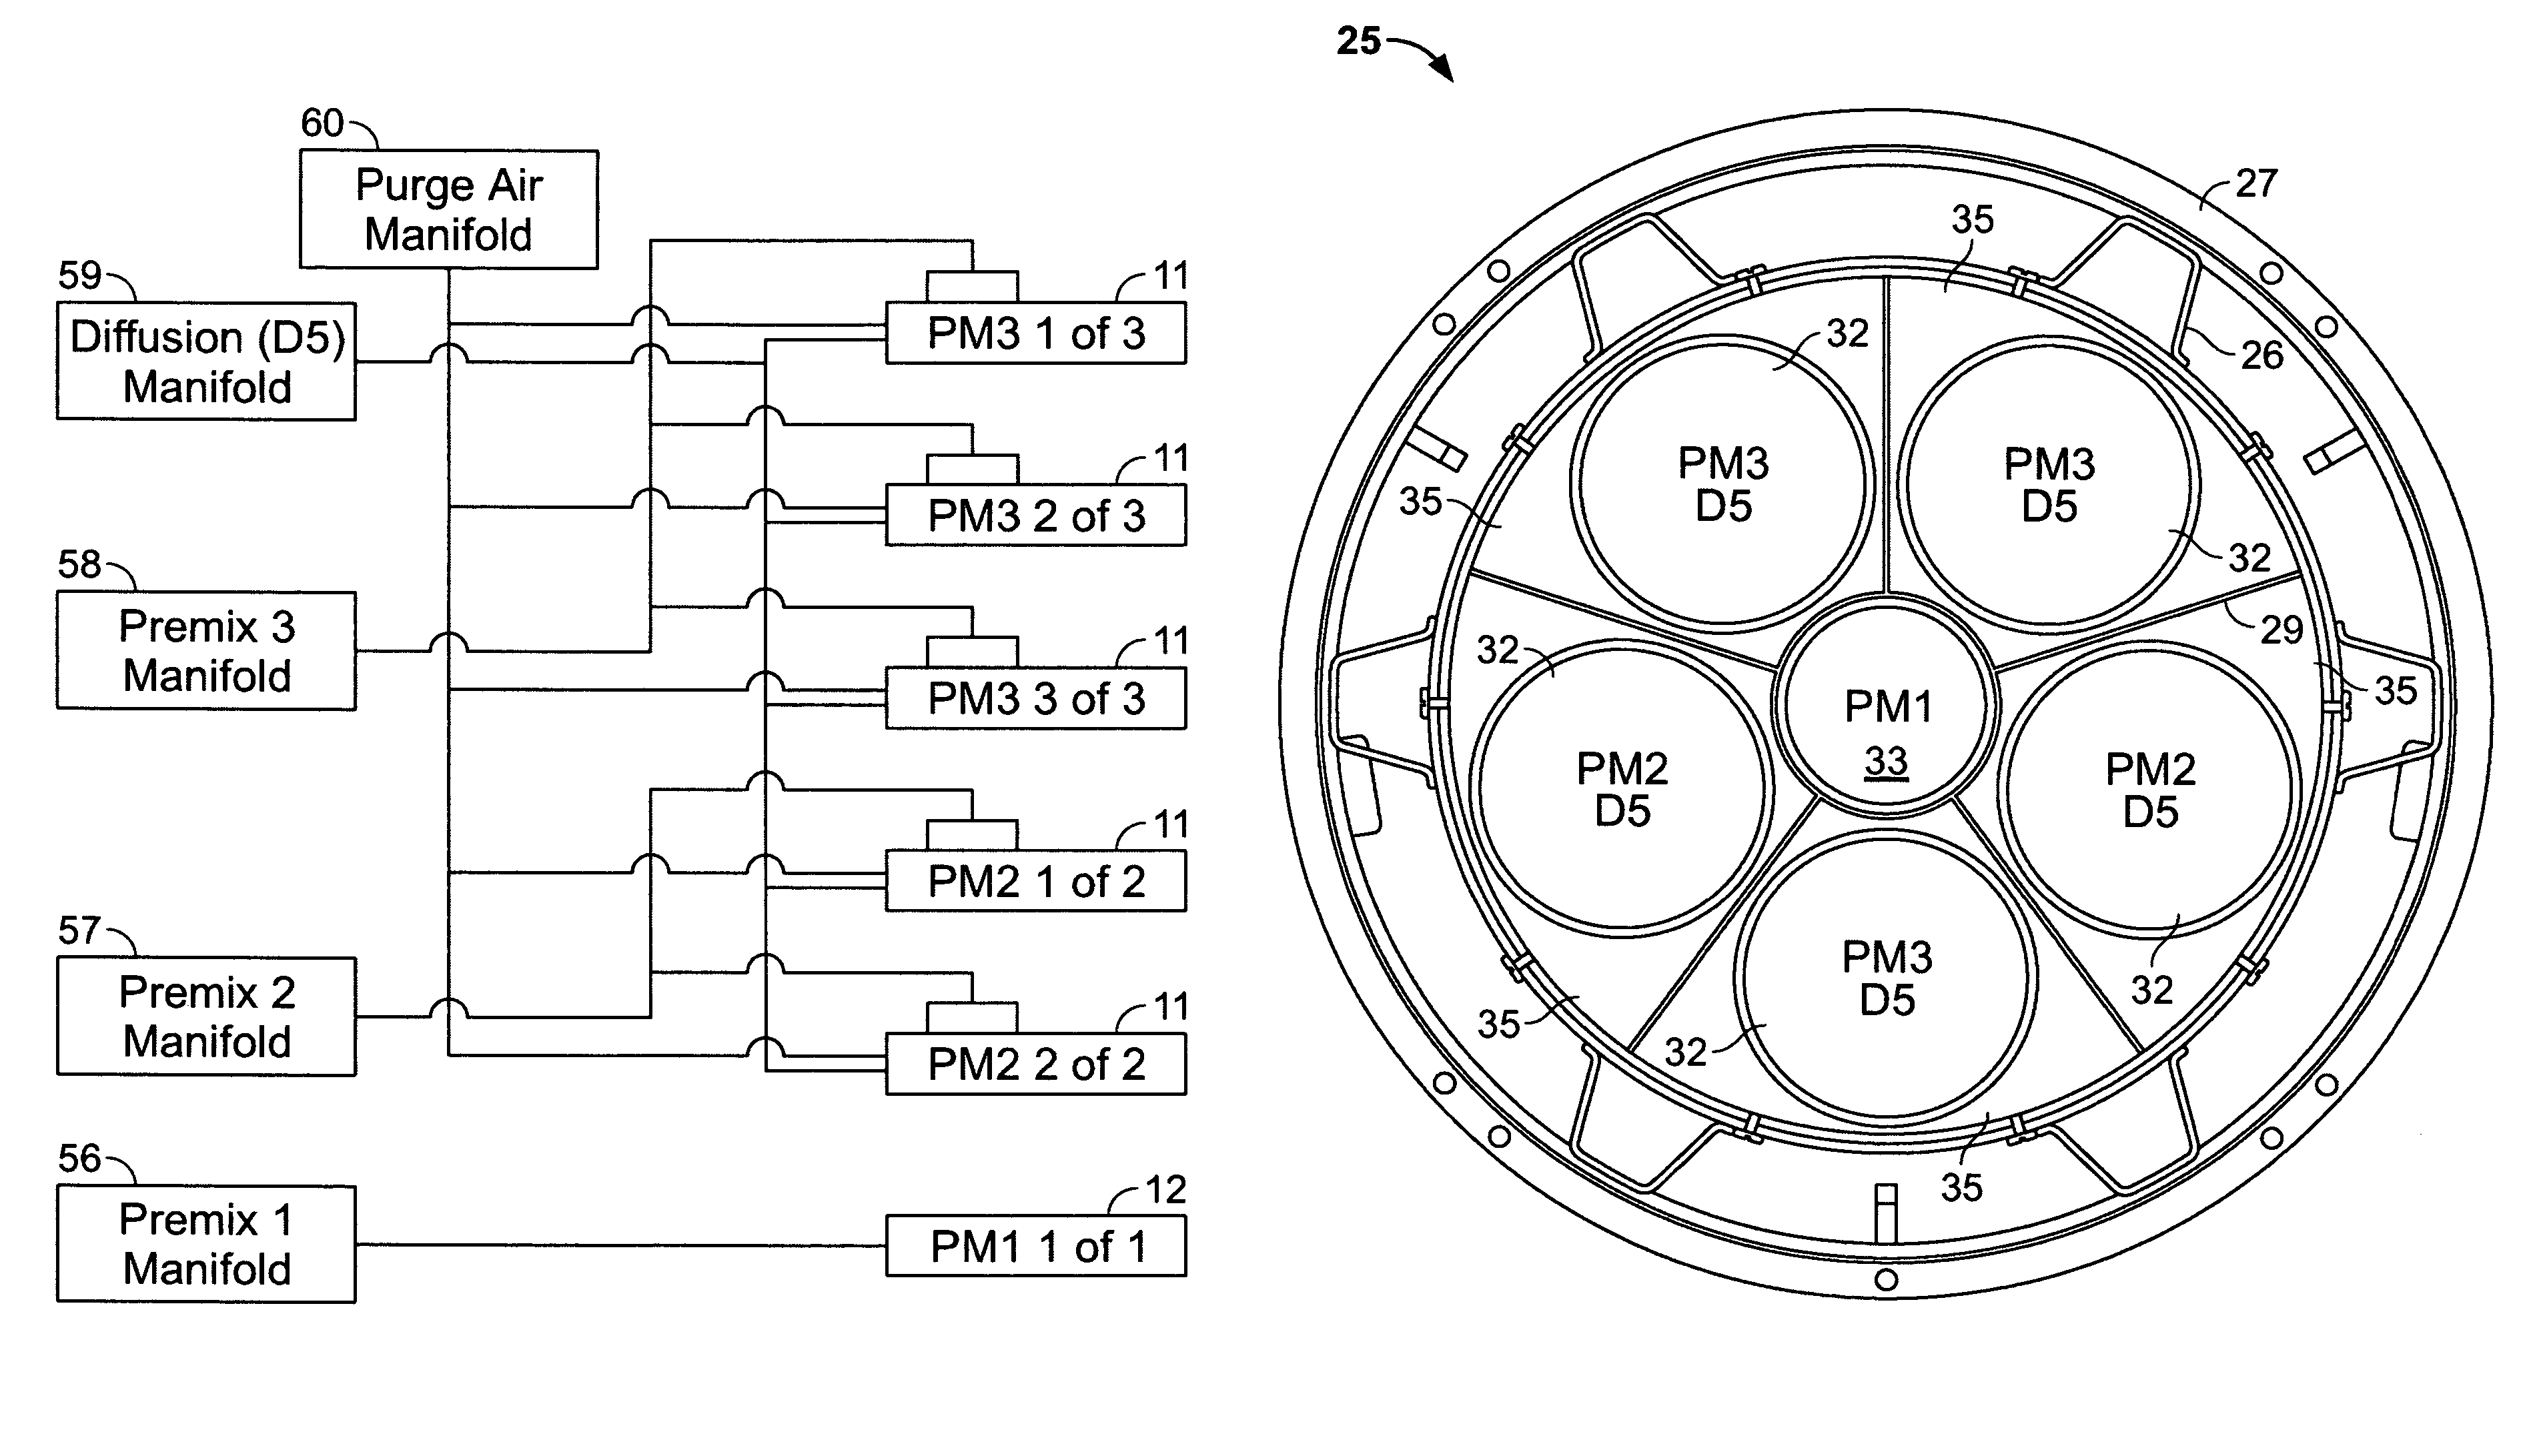 Methods and apparatus for low emission gas turbine energy generation